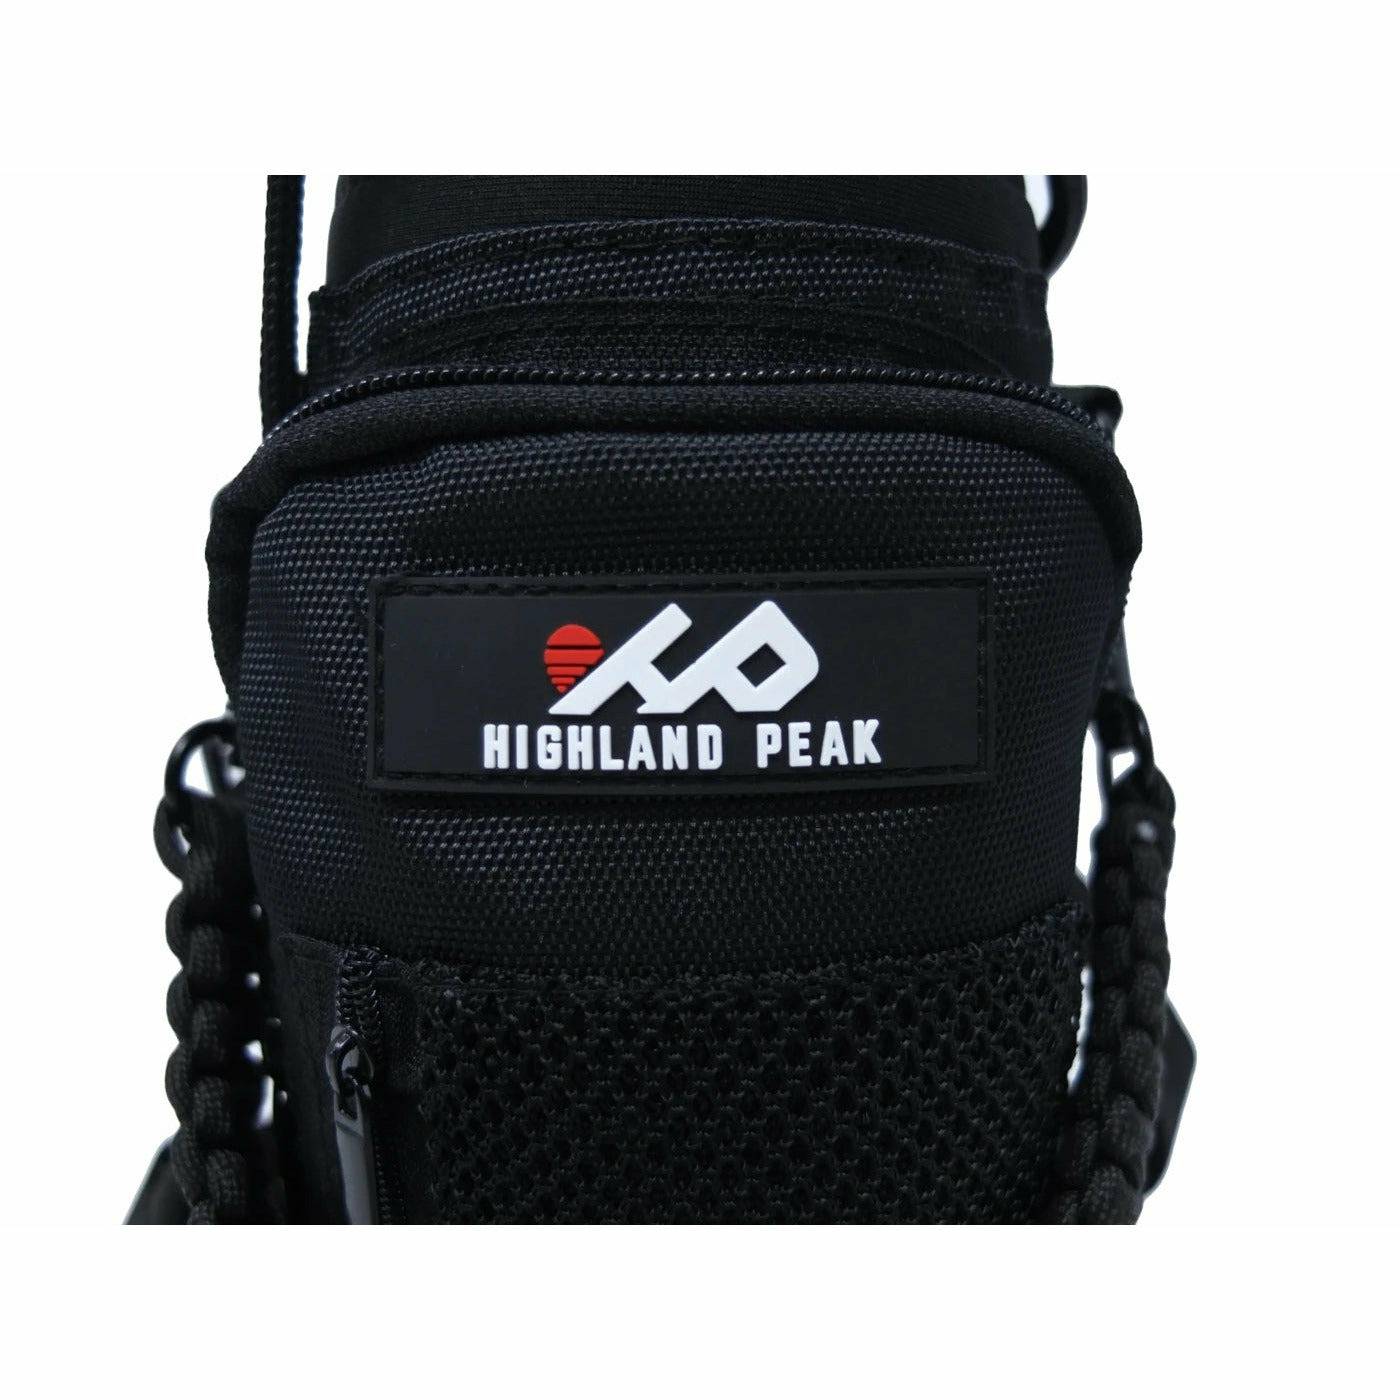 32oz Sleeve/Carrier with Paracord Survival Handle (Black)